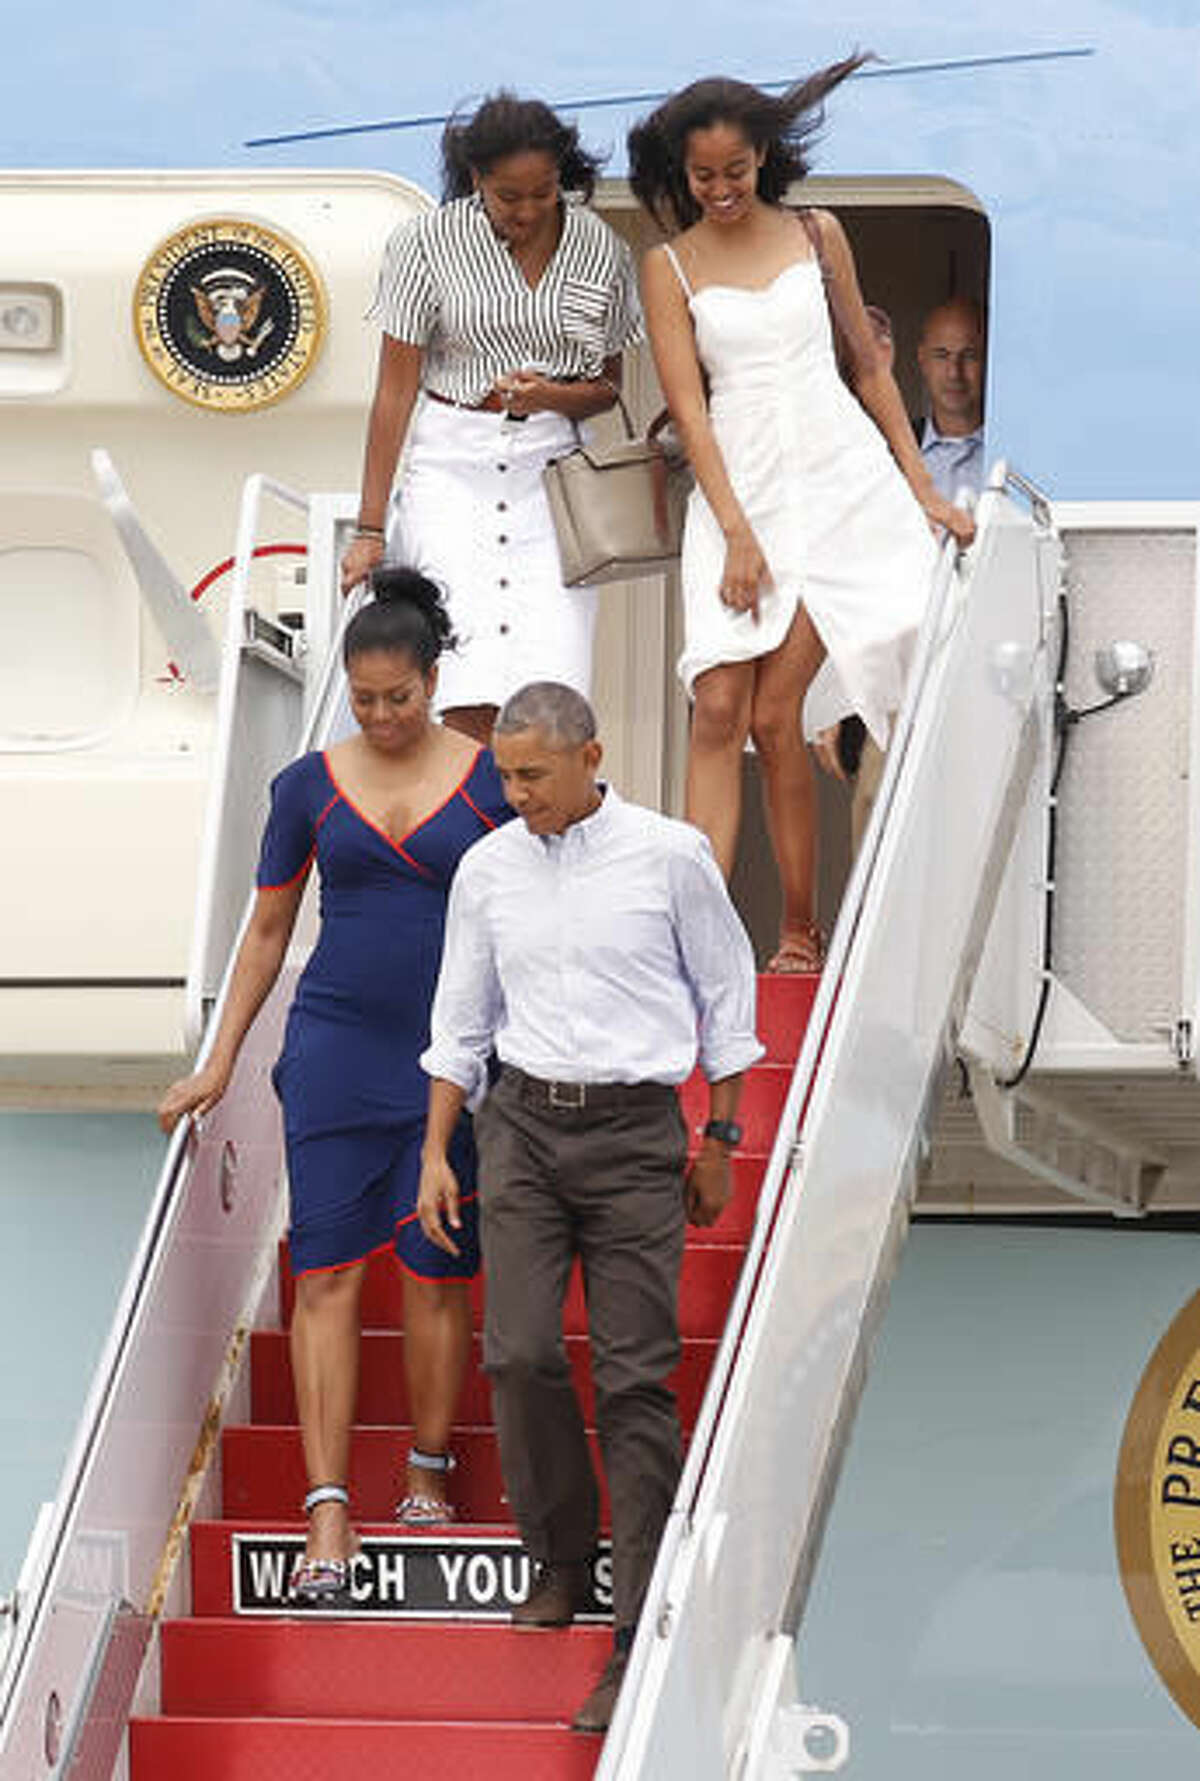 President Barack Obama and first lady Michelle Obama exit Air Force One followed by daughters Sasha, left, and Malia, right, at the Cape Cod Coast Guard Station in Bourne, Mass., Saturday, Aug. 6, 2016, en route to Martha's Vineyard. (AP Photo/Stew Milne)